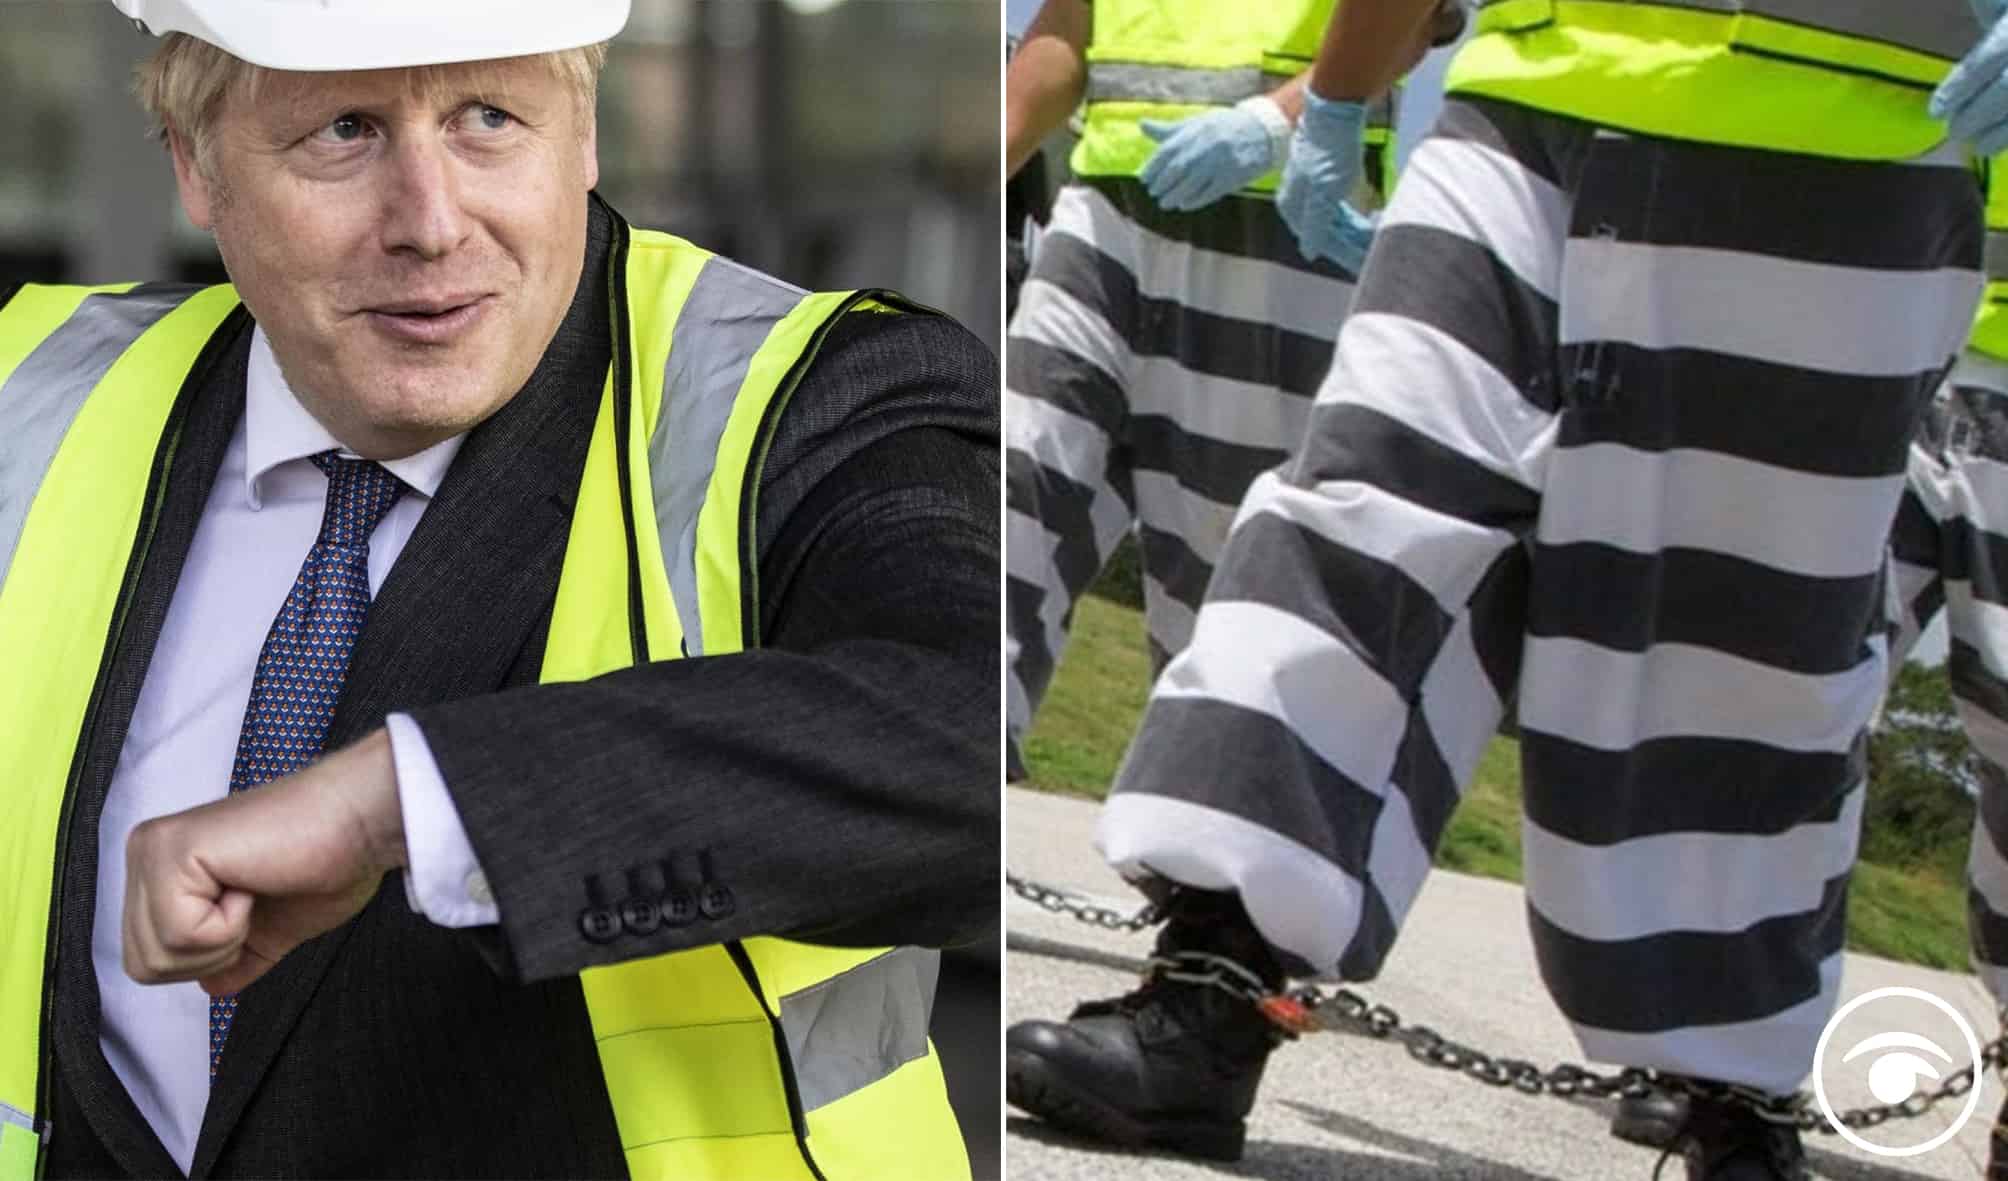 PM wants yobs in shackles – and everyone said the same thing